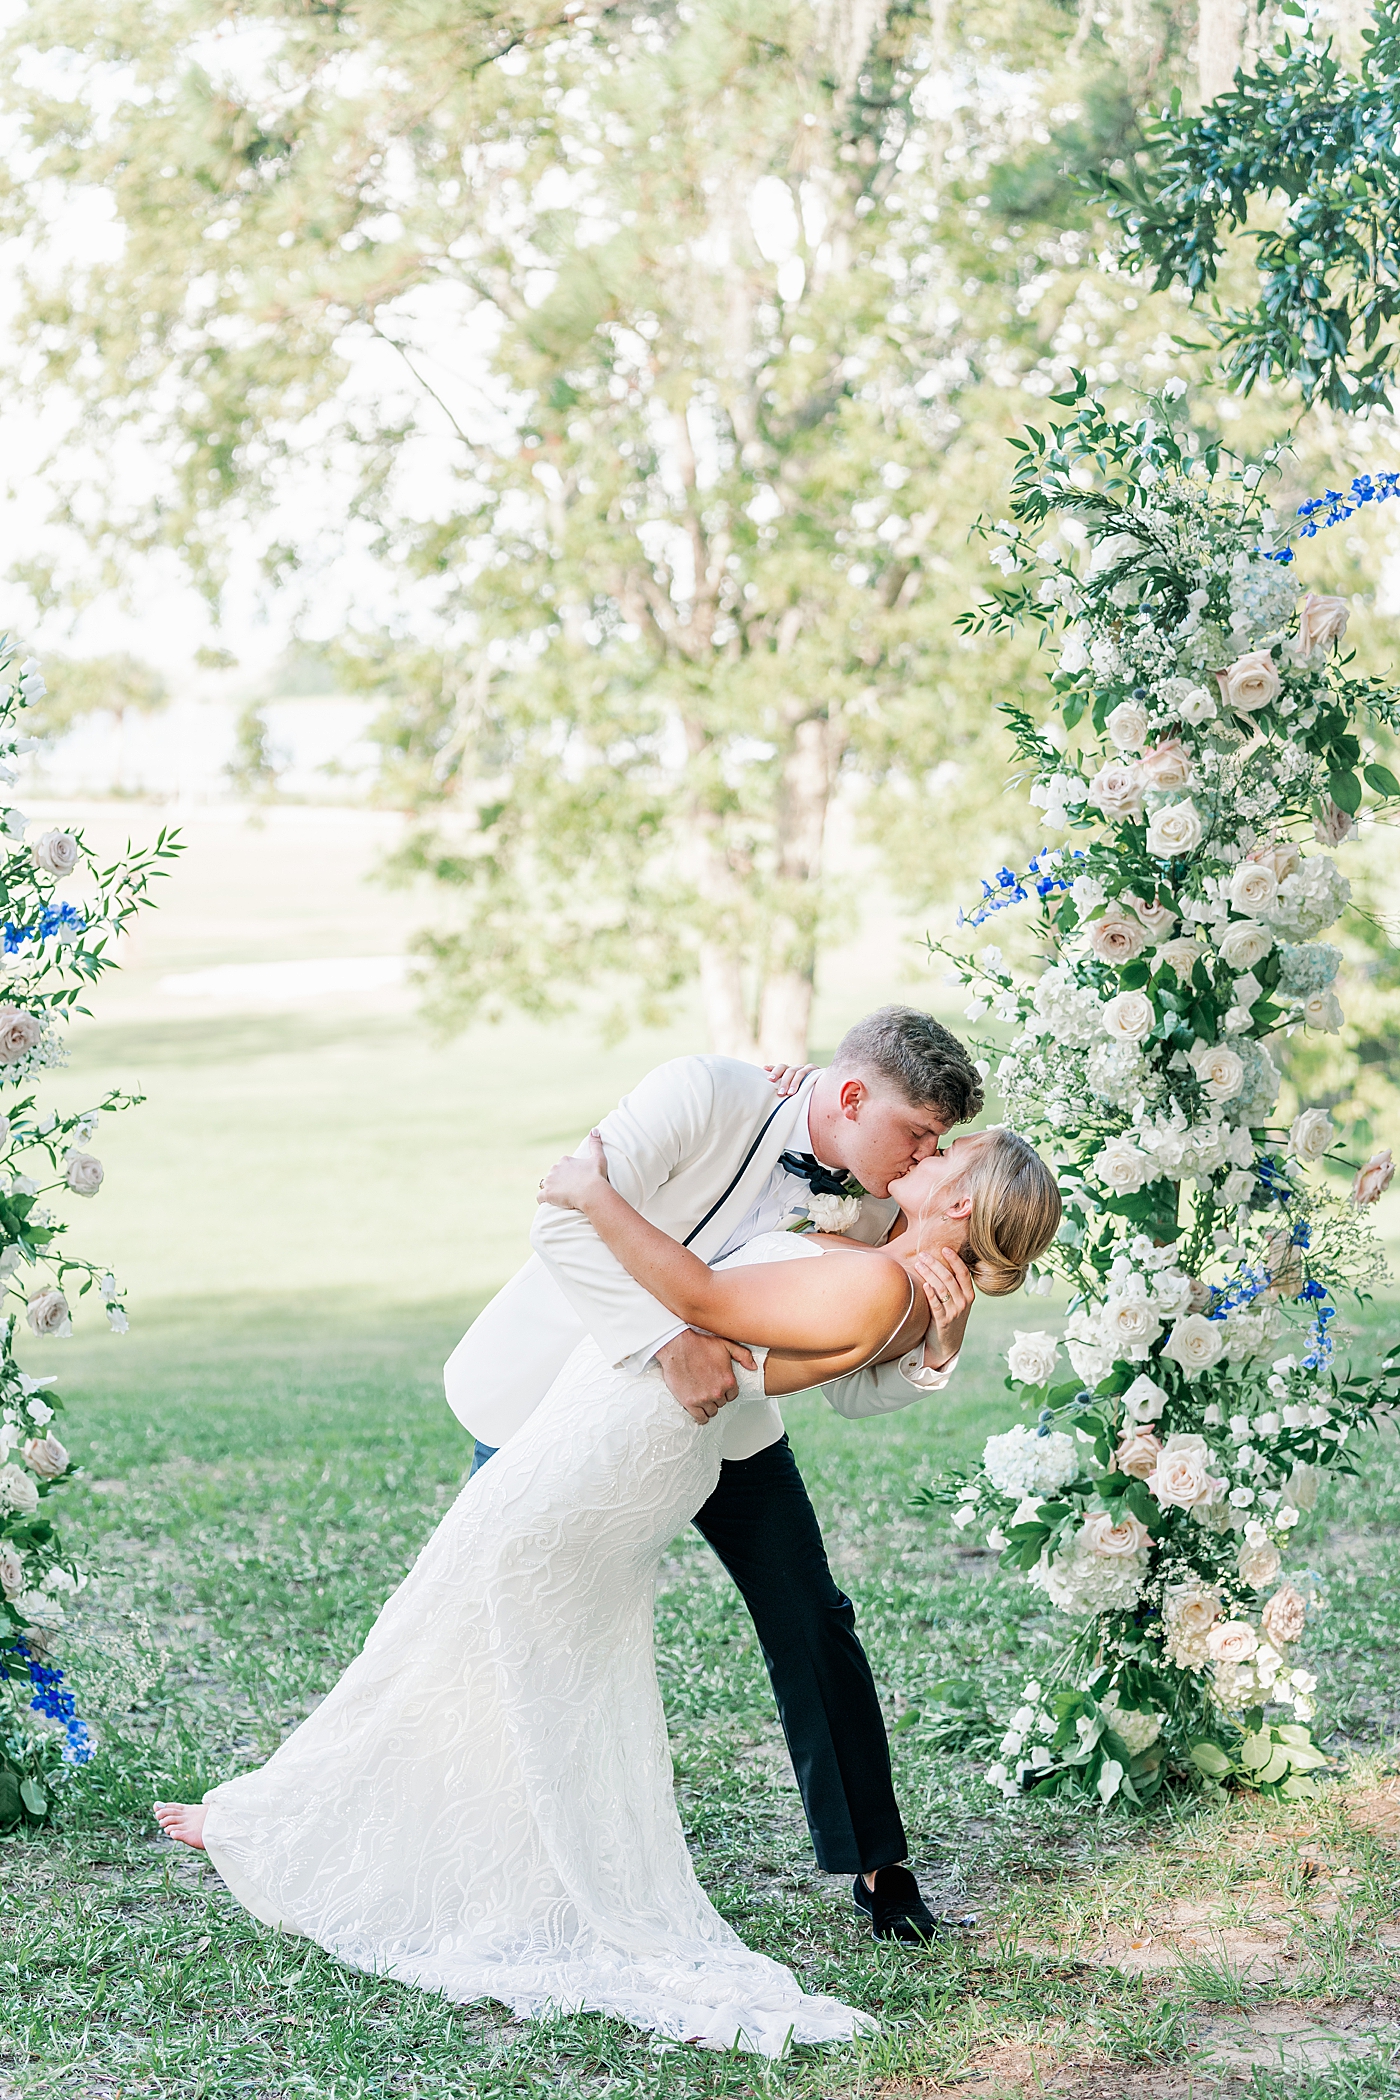 Groom dipping bride under arbor during their Elegant Grandmillenial Charleston Wedding | Images by Annie Laura Photography